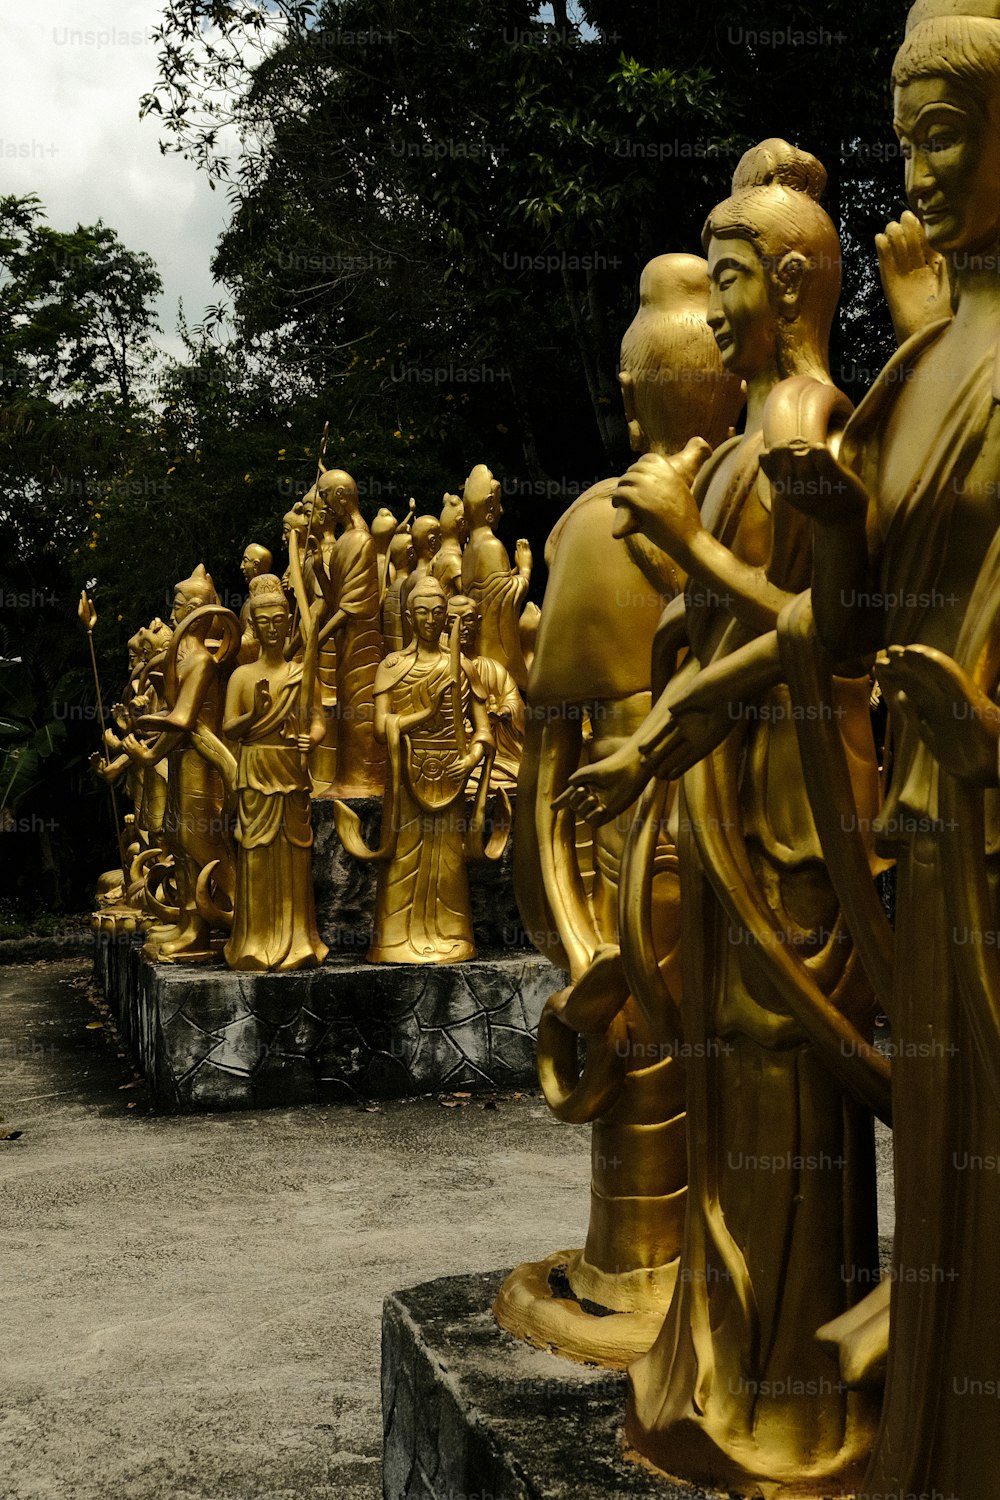 a group of golden statues sitting next to each other